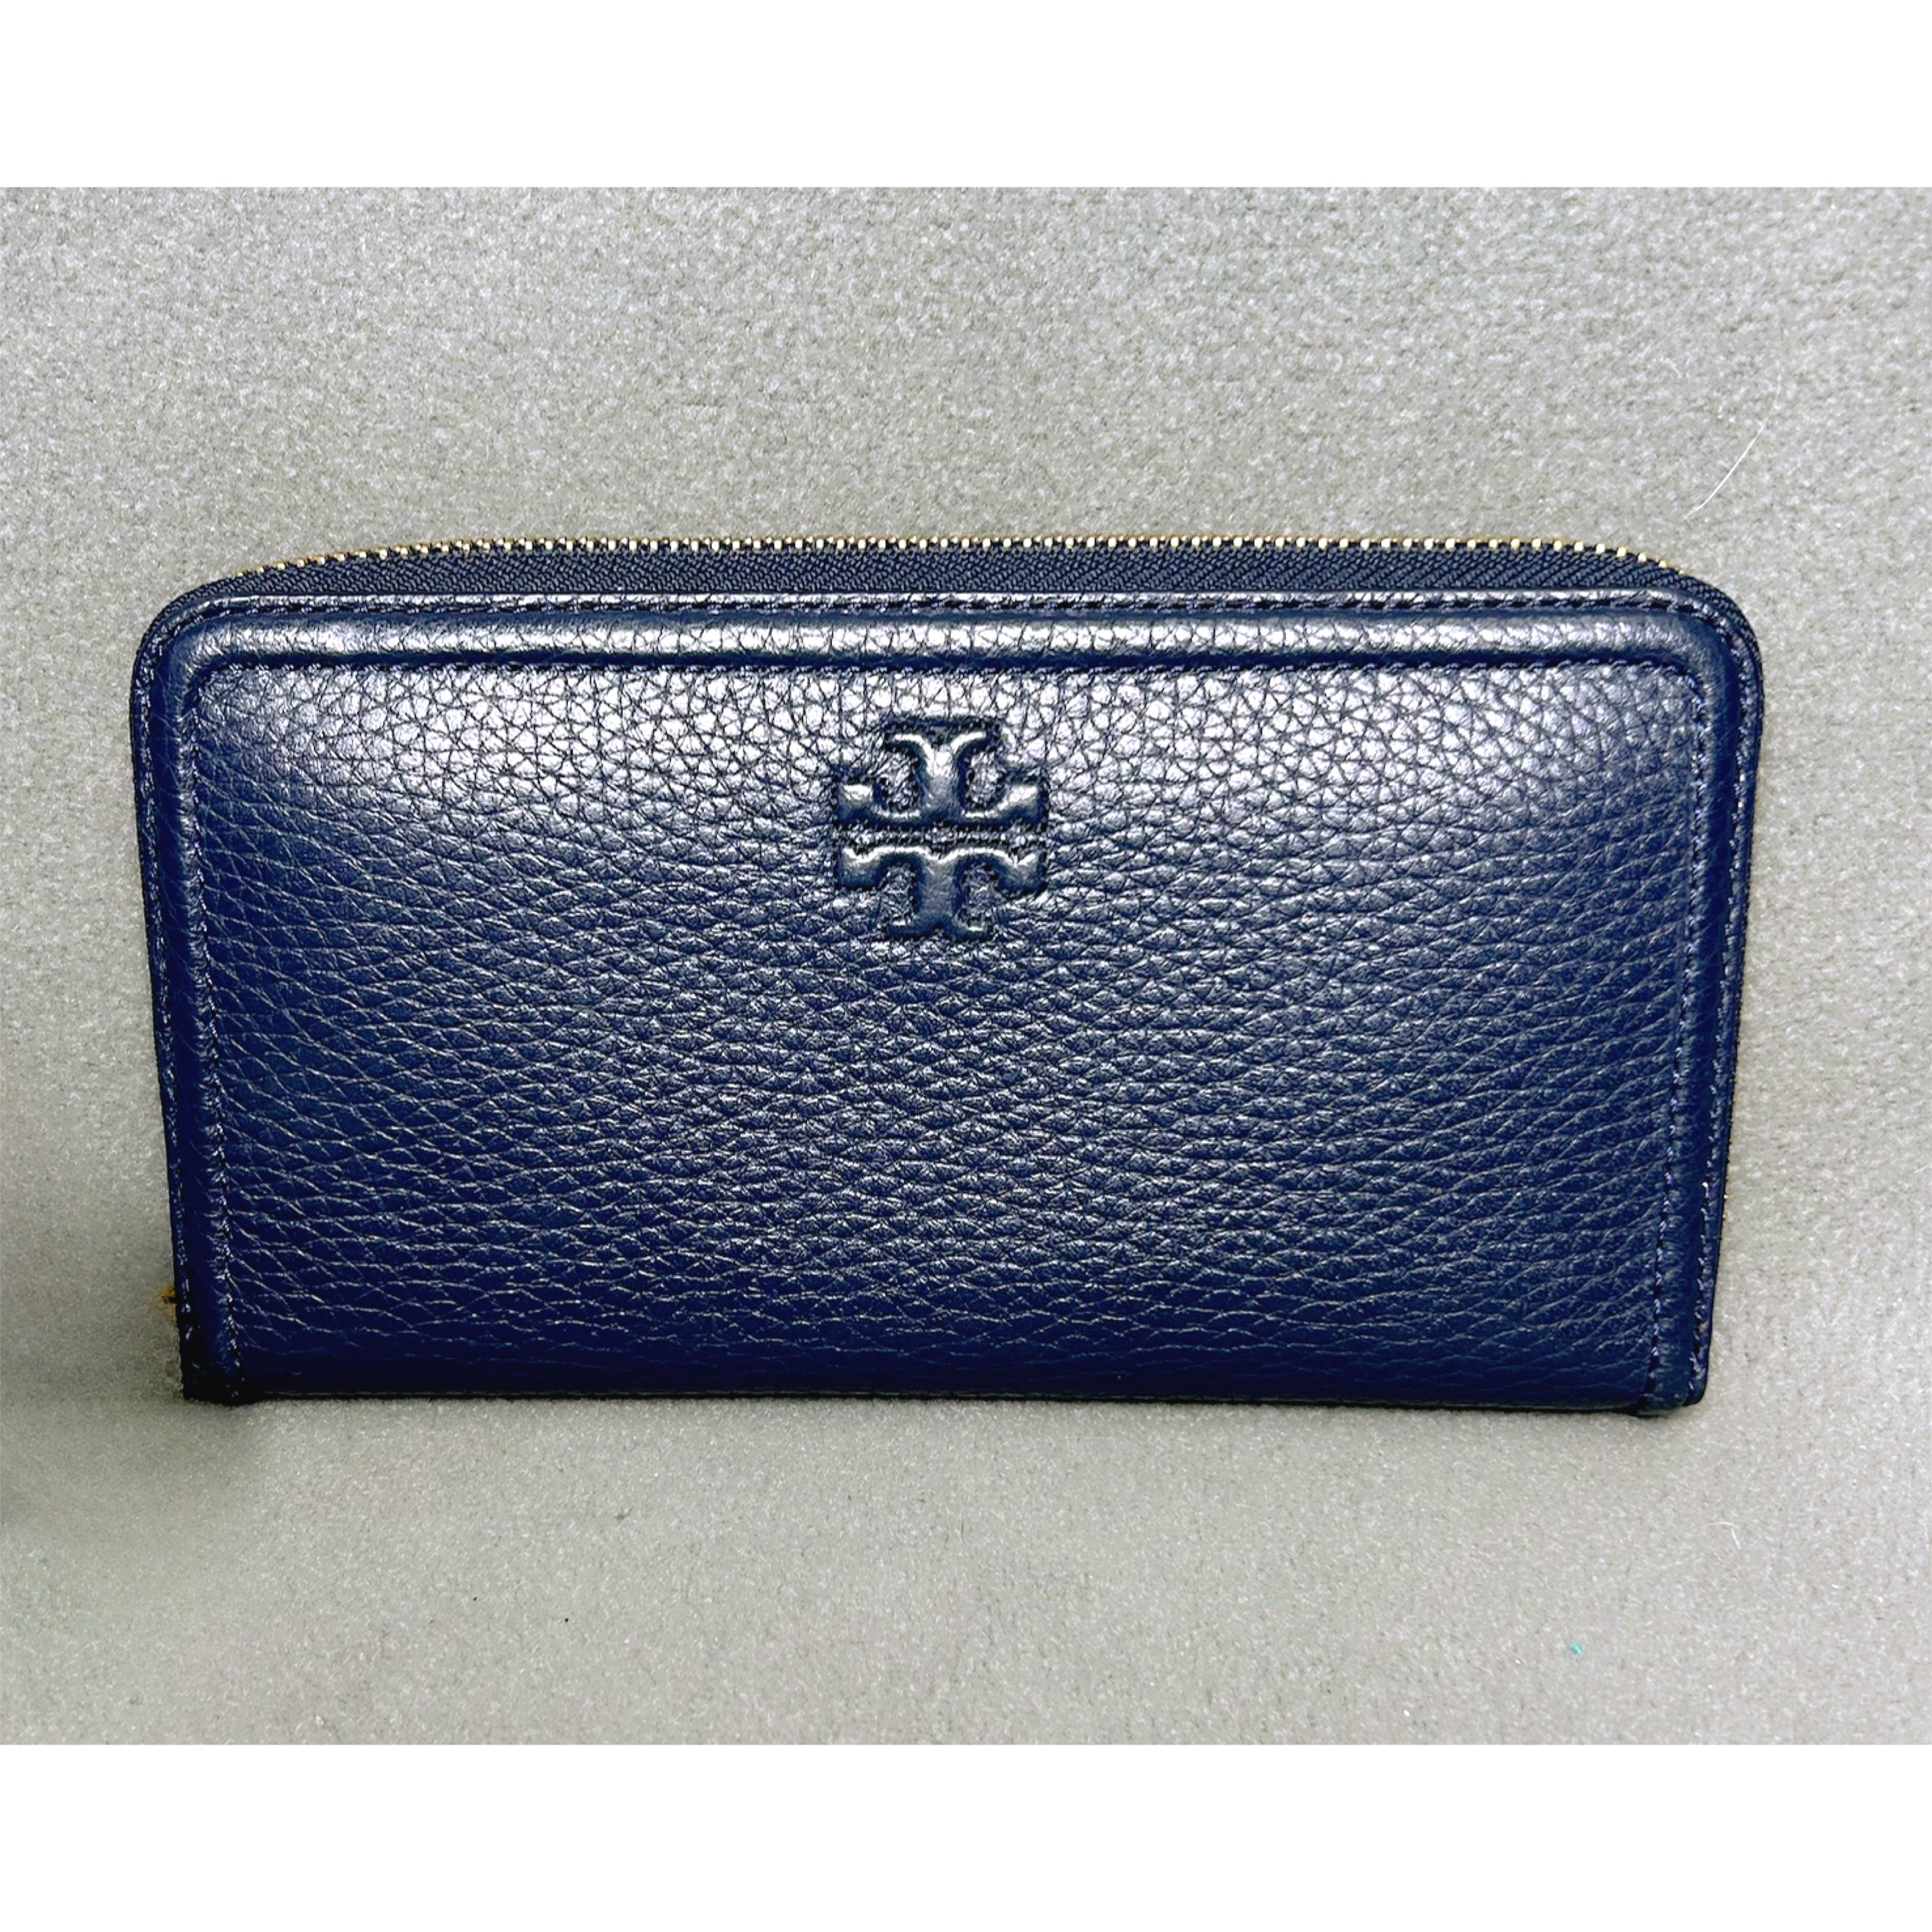 Tory Burch navy Continental zip wallet, LIKE NEW!